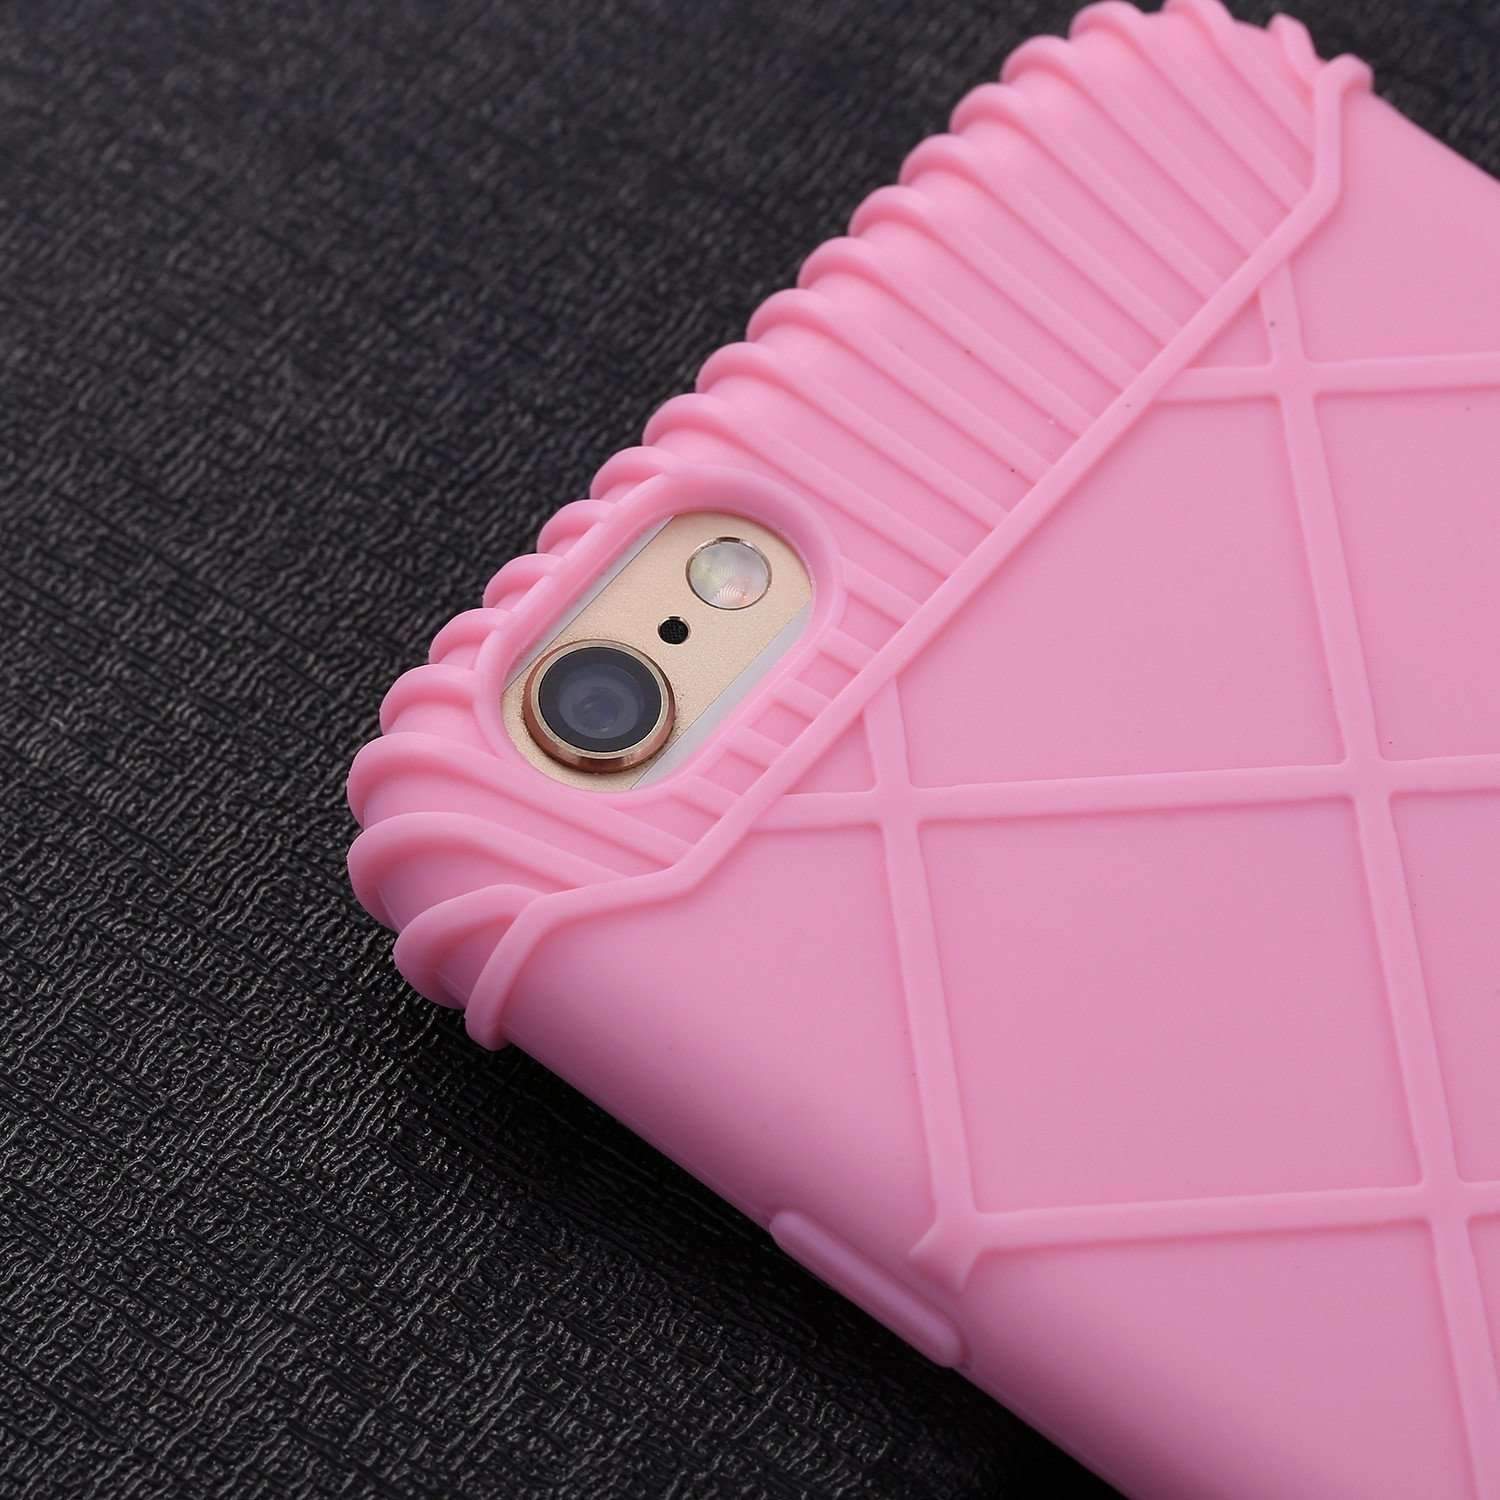 Candy Soft Rubber Phone Cases - New Phone Cases For Your Phone!